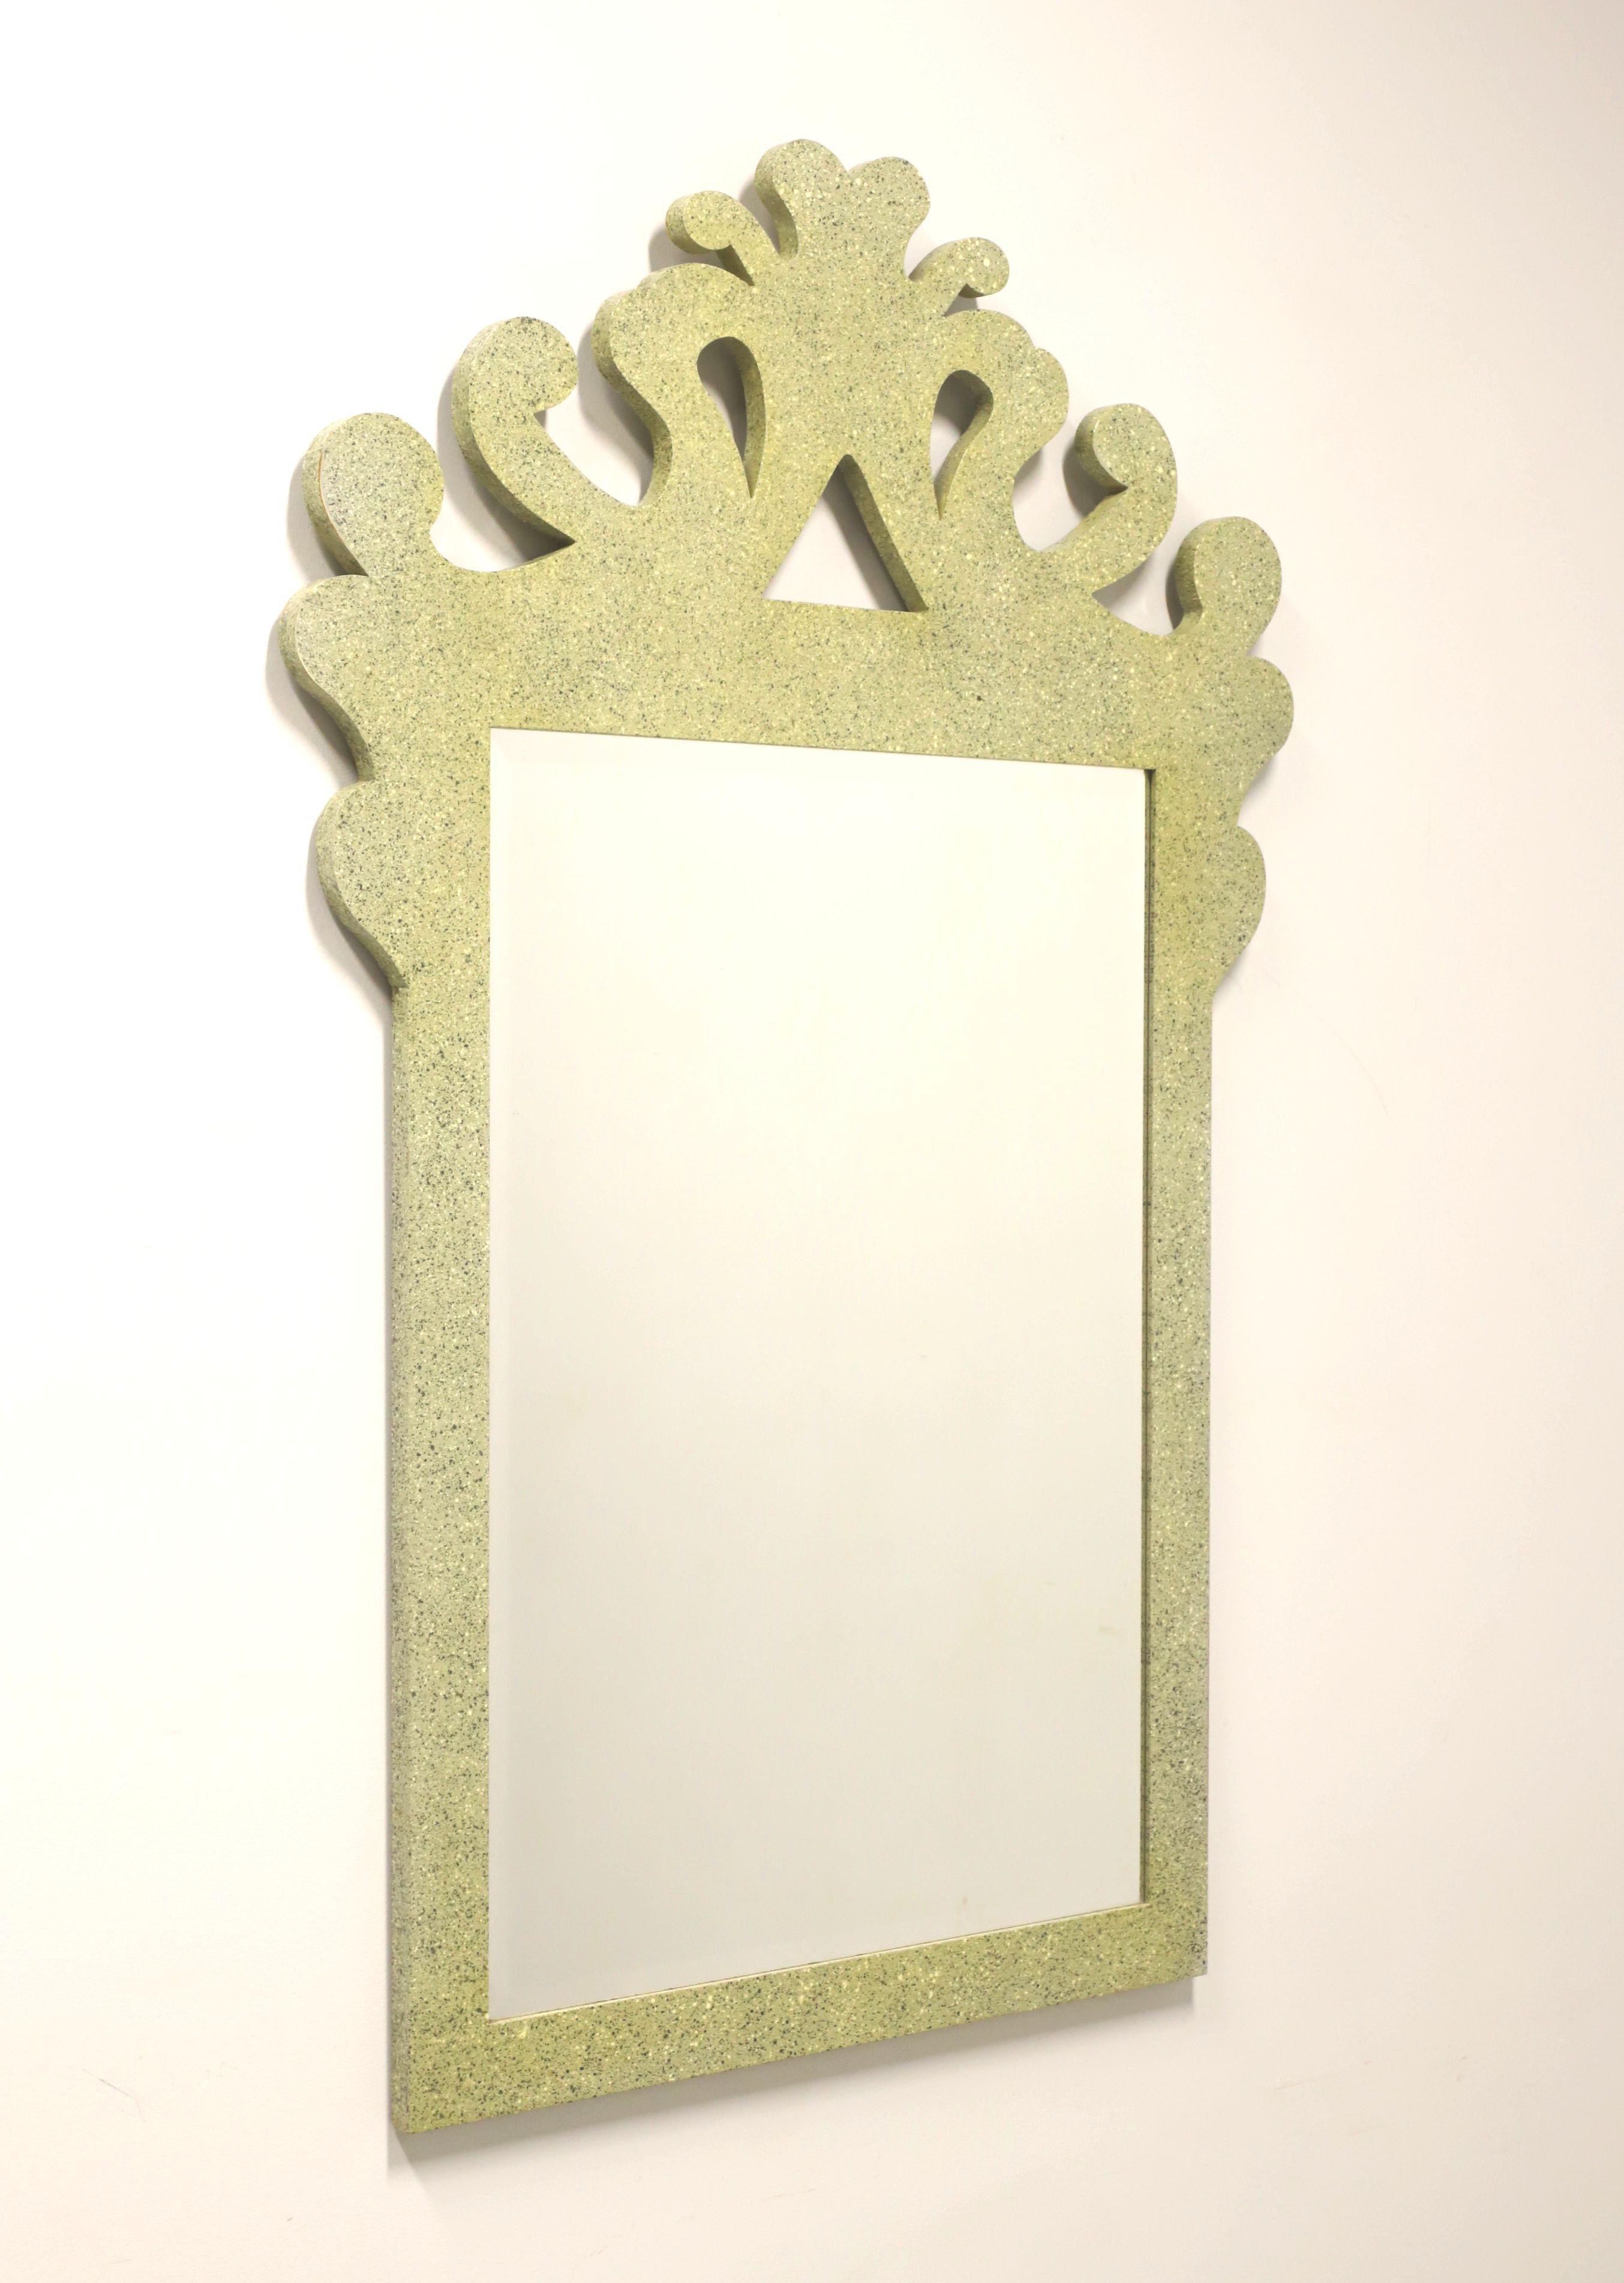 Mid 20th Century Italian Art Deco Green Speckled Beveled Wall Mirror For Sale 5